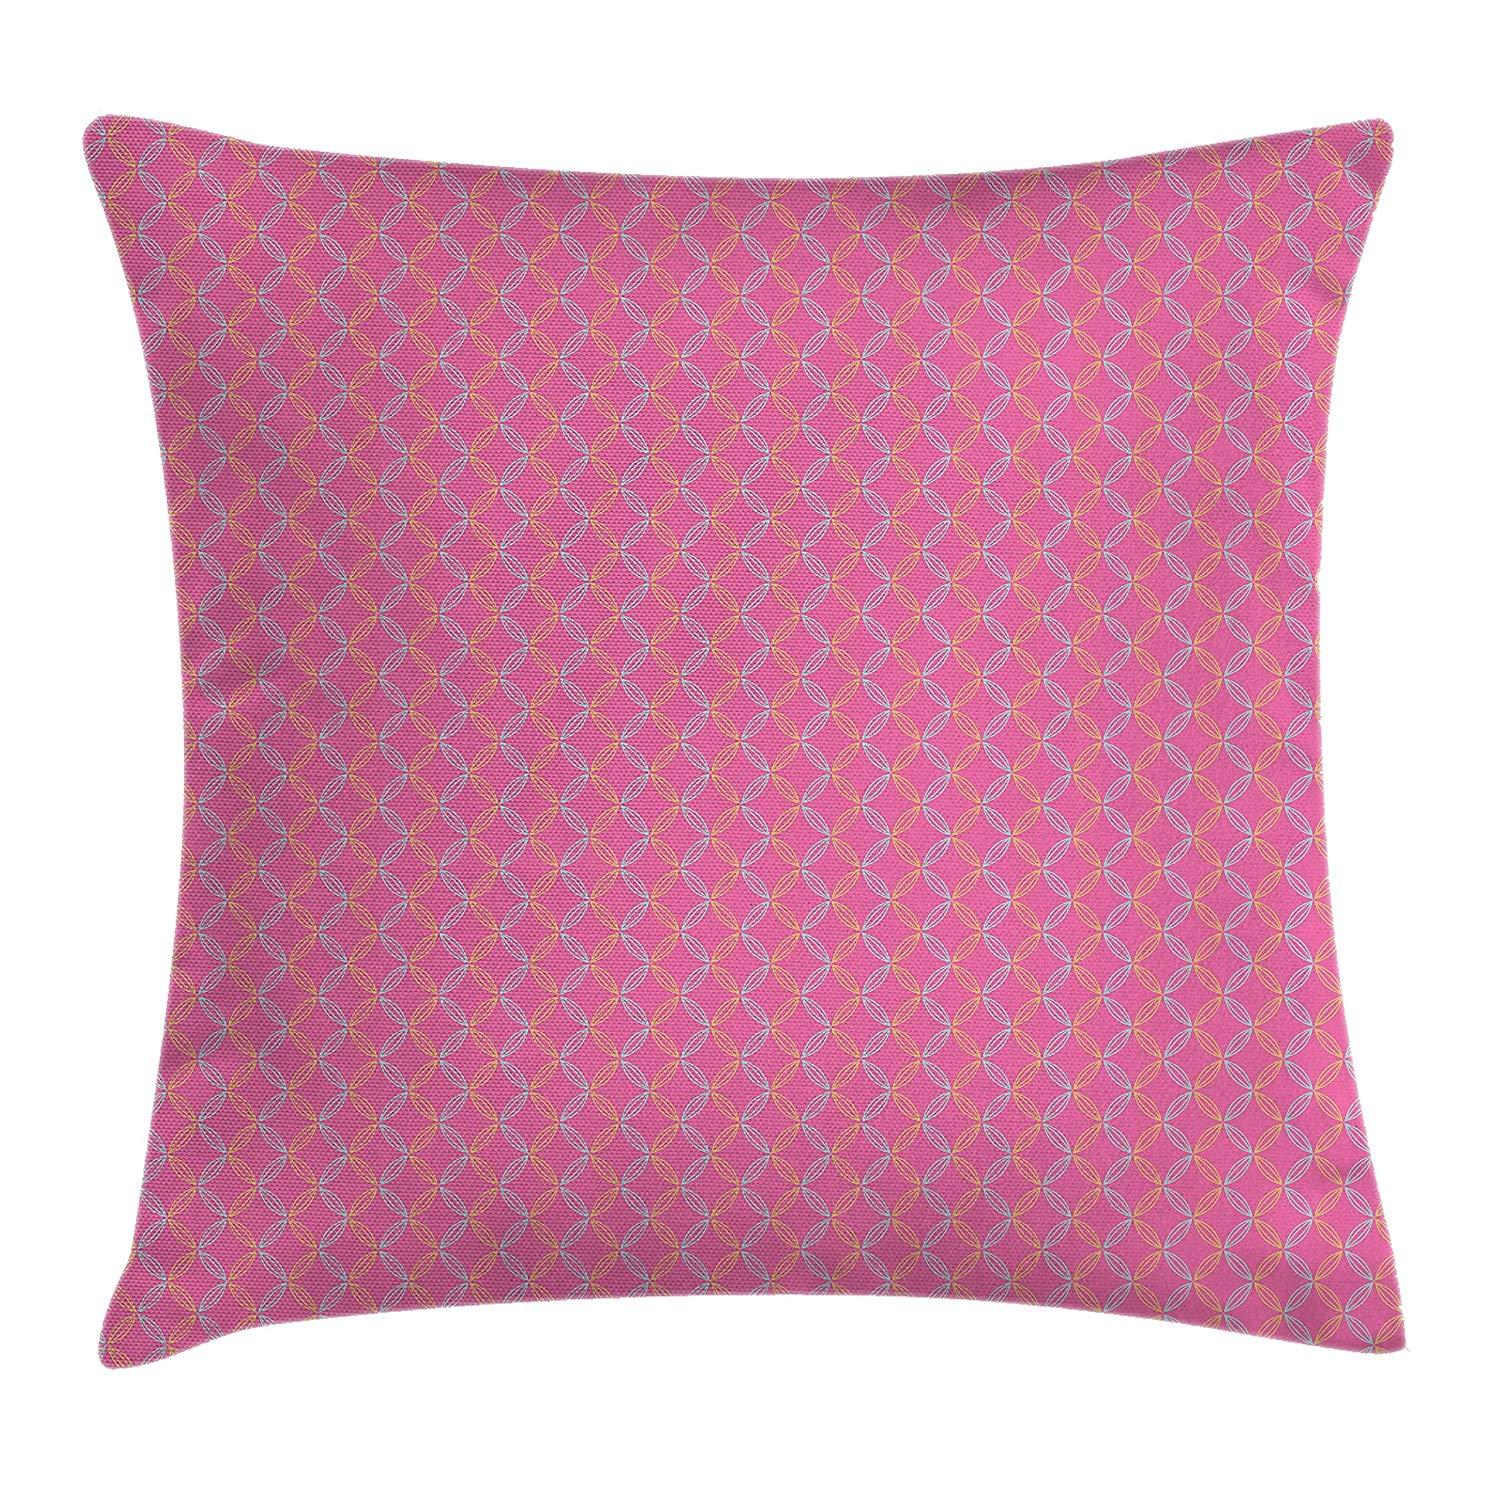 Red Square with White Plus Sign Logo - Ambesonne Geometric Throw Pillow Cushion Cover, Circular